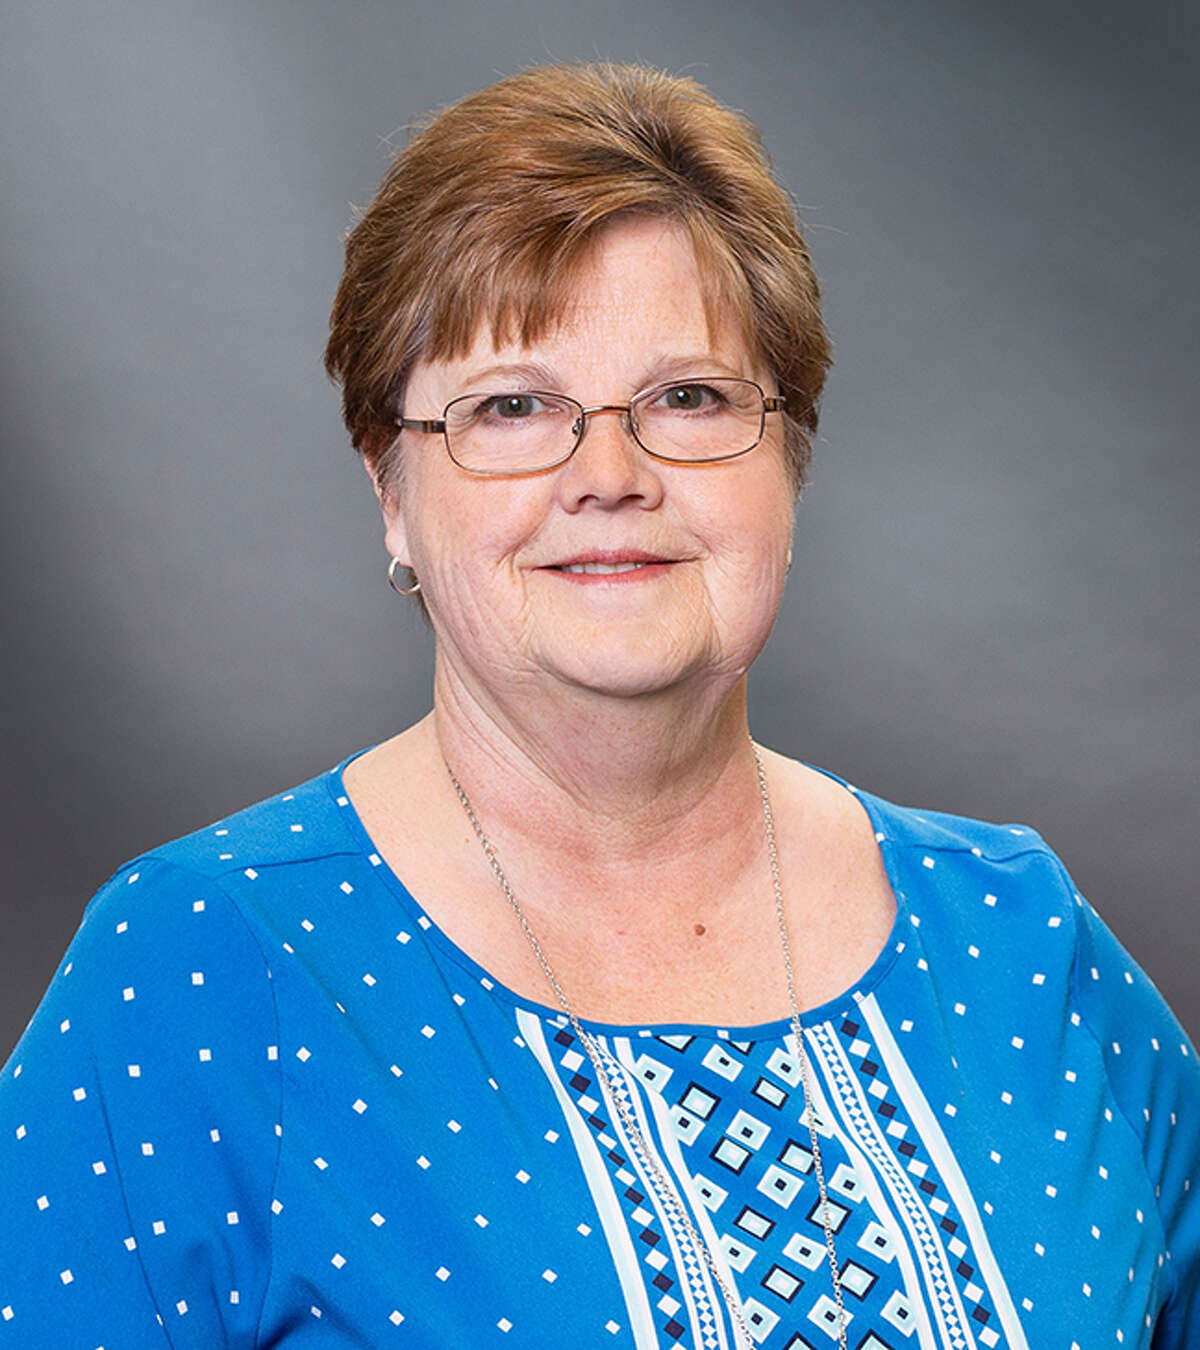 Bank of Hillsboro Edwardsville Branch Manager Lisa Claytor has retired after 44 years in banking.